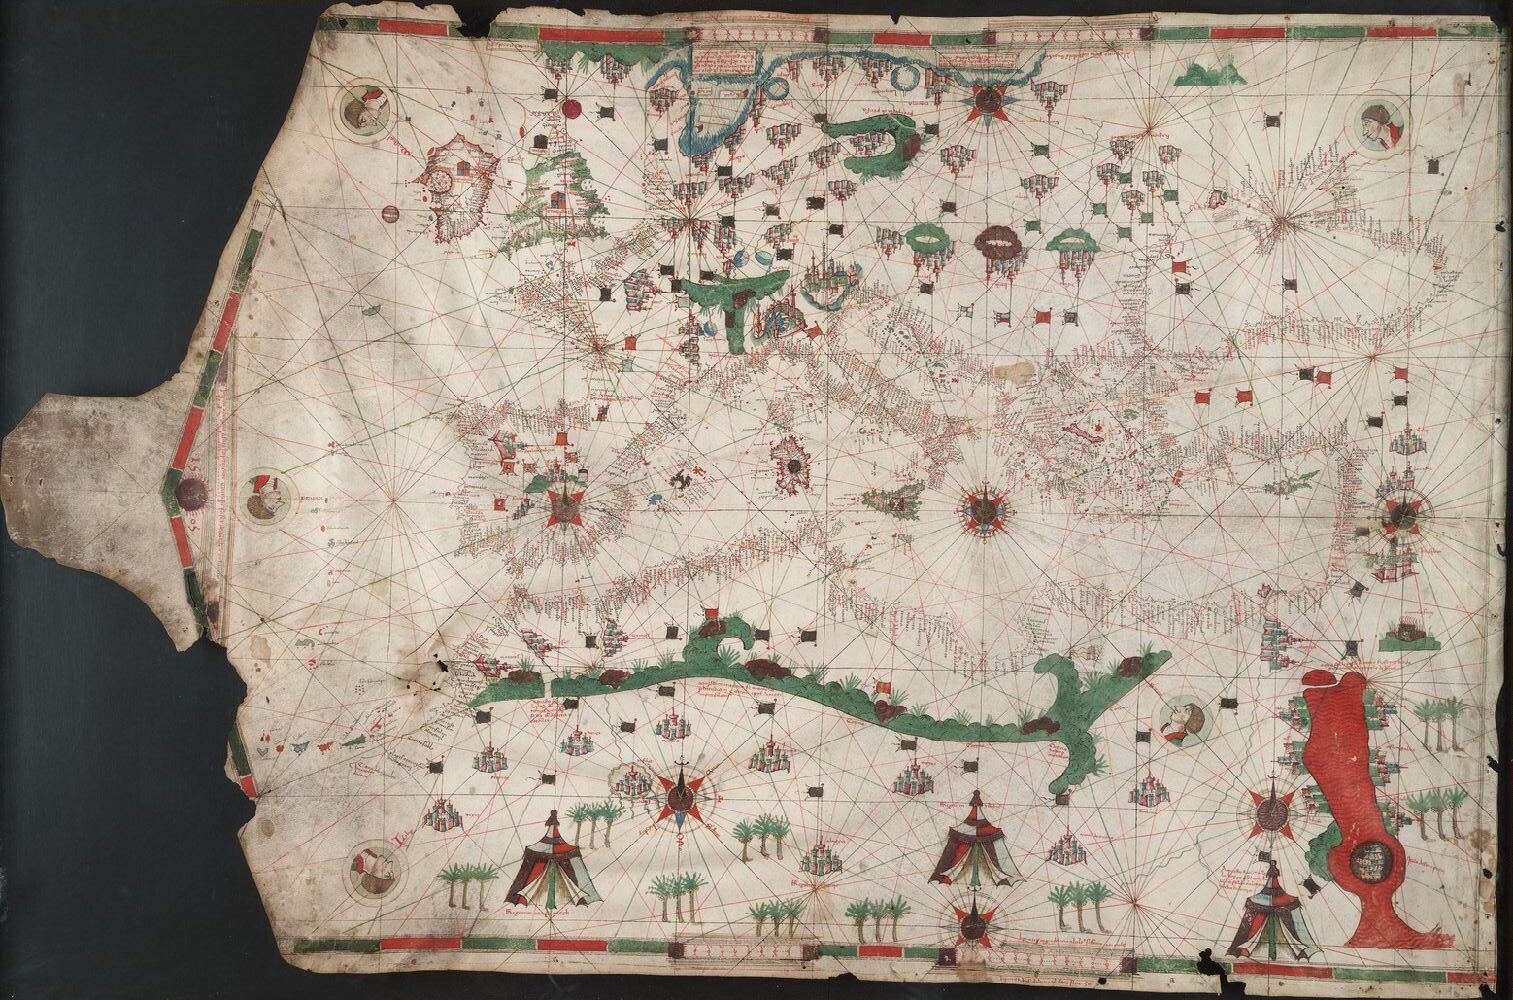 Map of Mediterranean drawn with brown, green, and red ink on parchment. Portolan chart made by Judah Ben Zara, 1505.